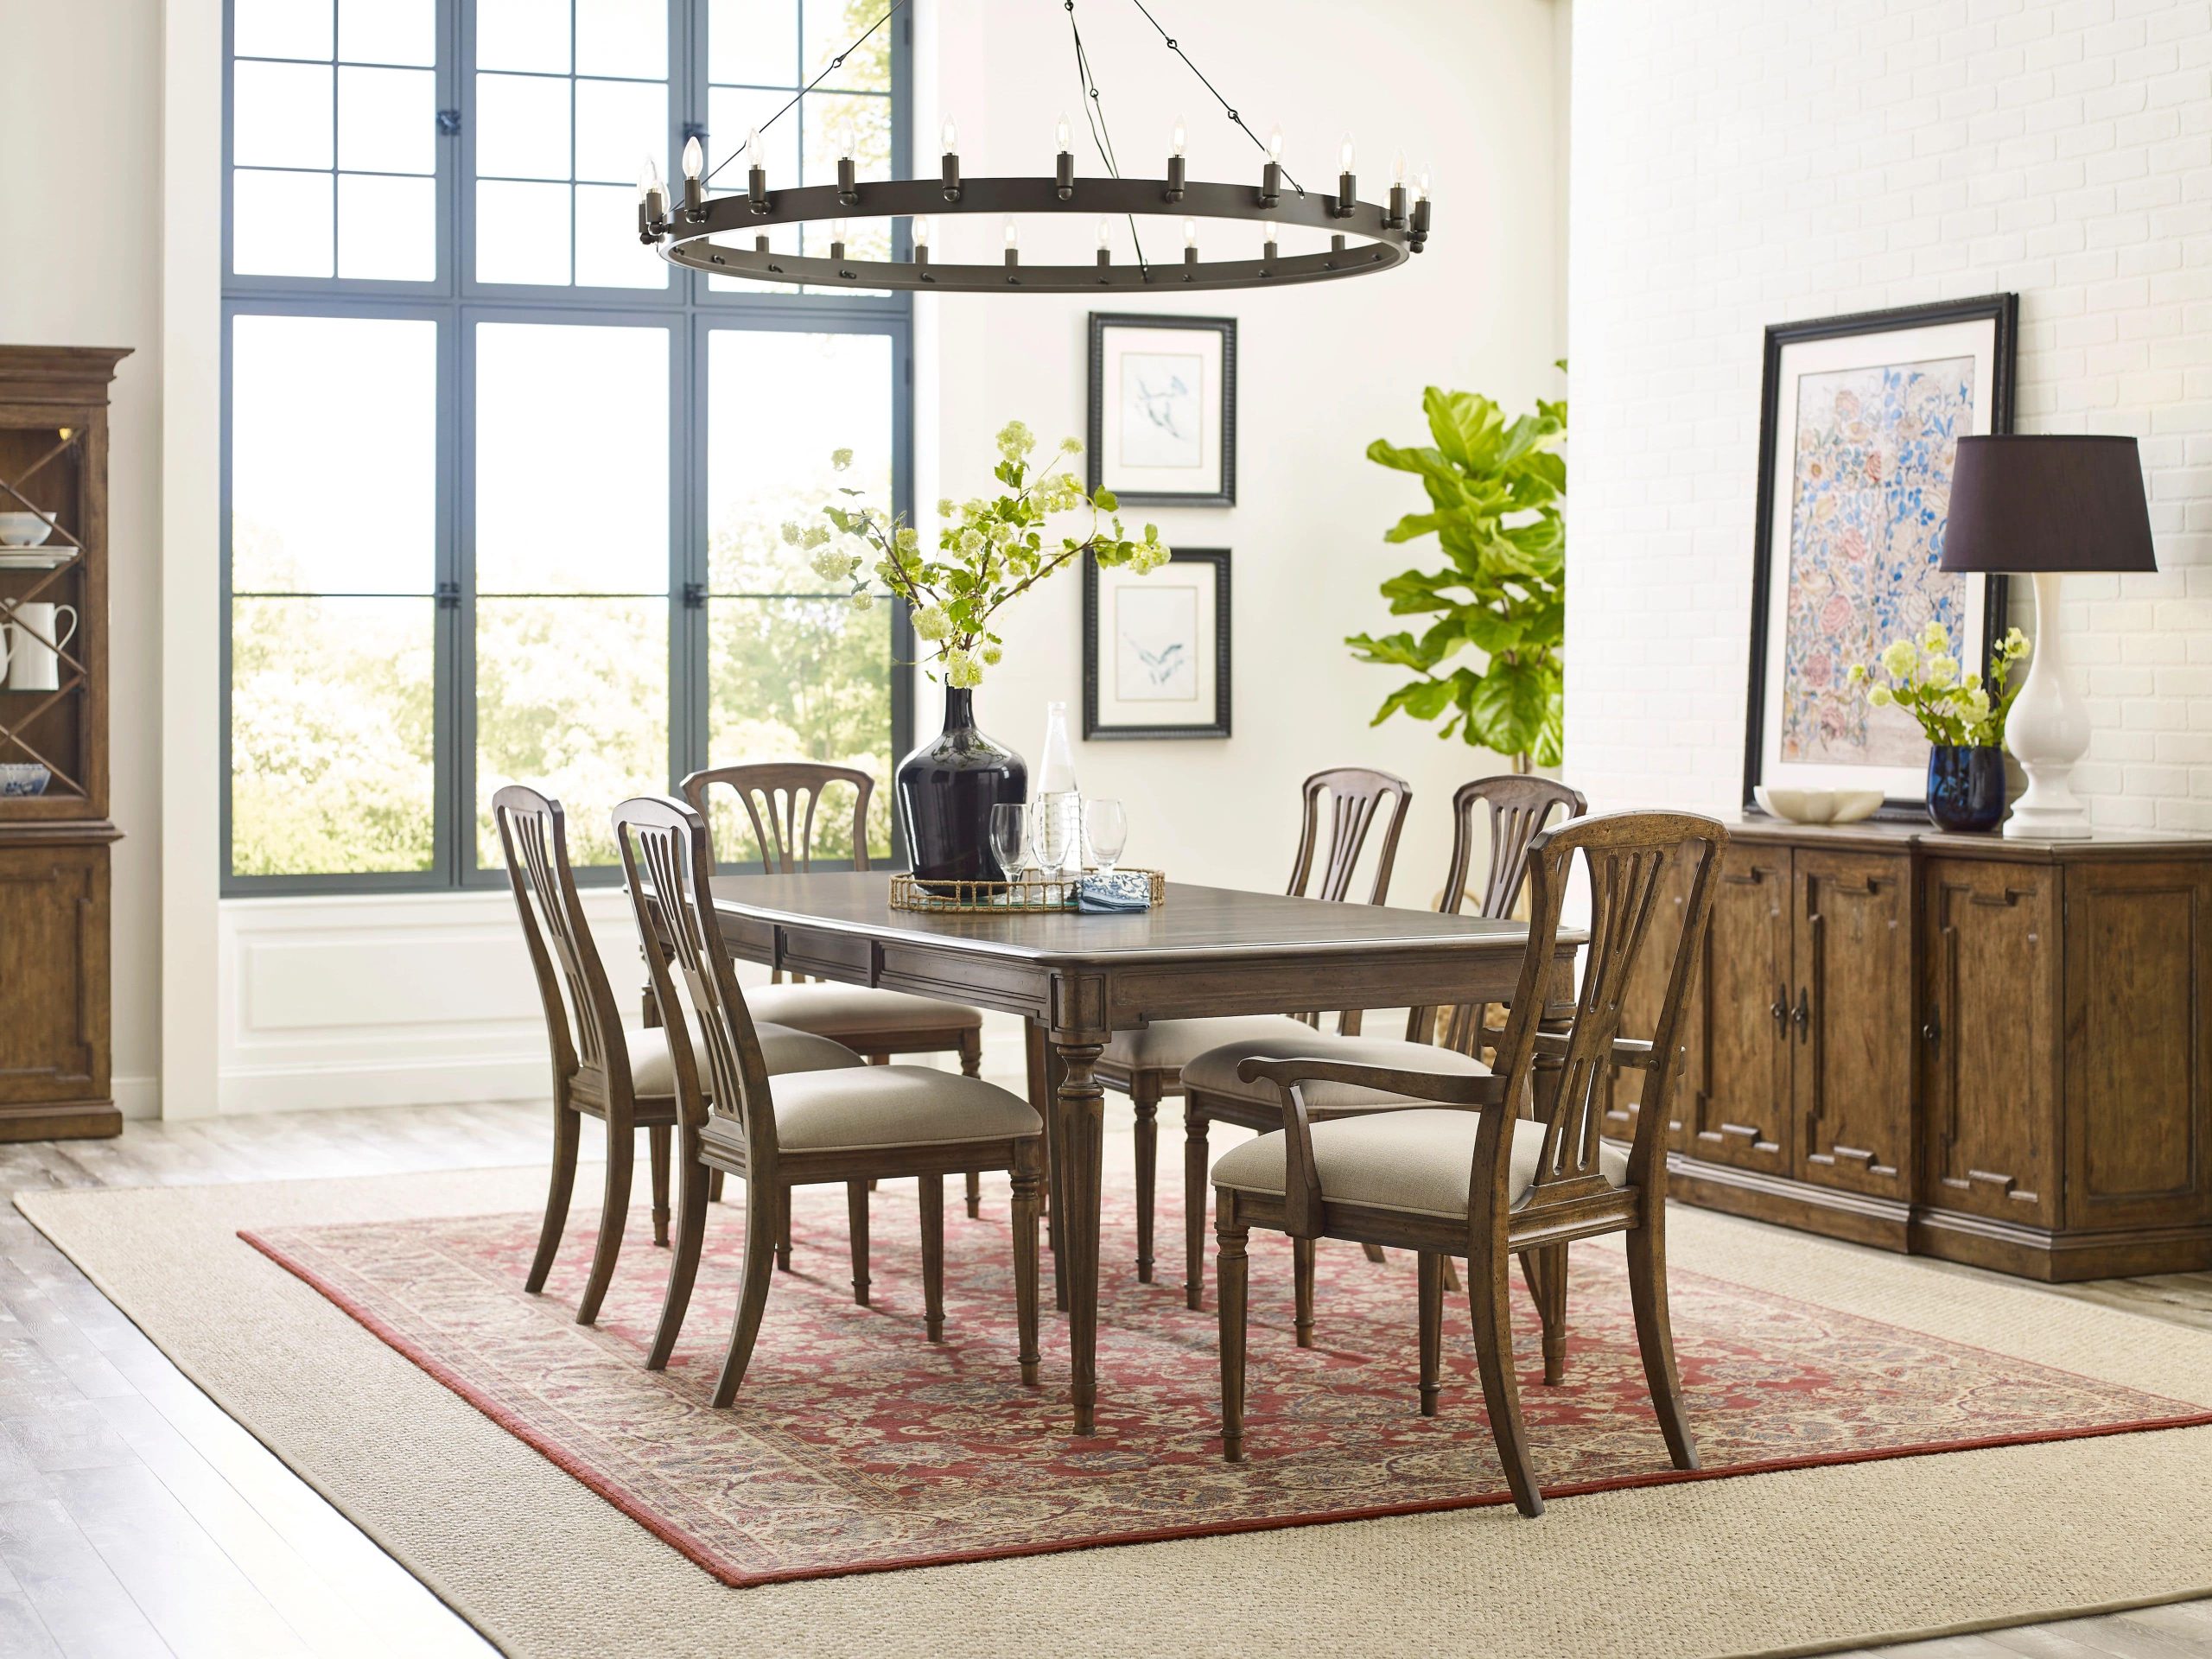 Make your home holiday ready with a Kincaid dining table from EF Brannon.